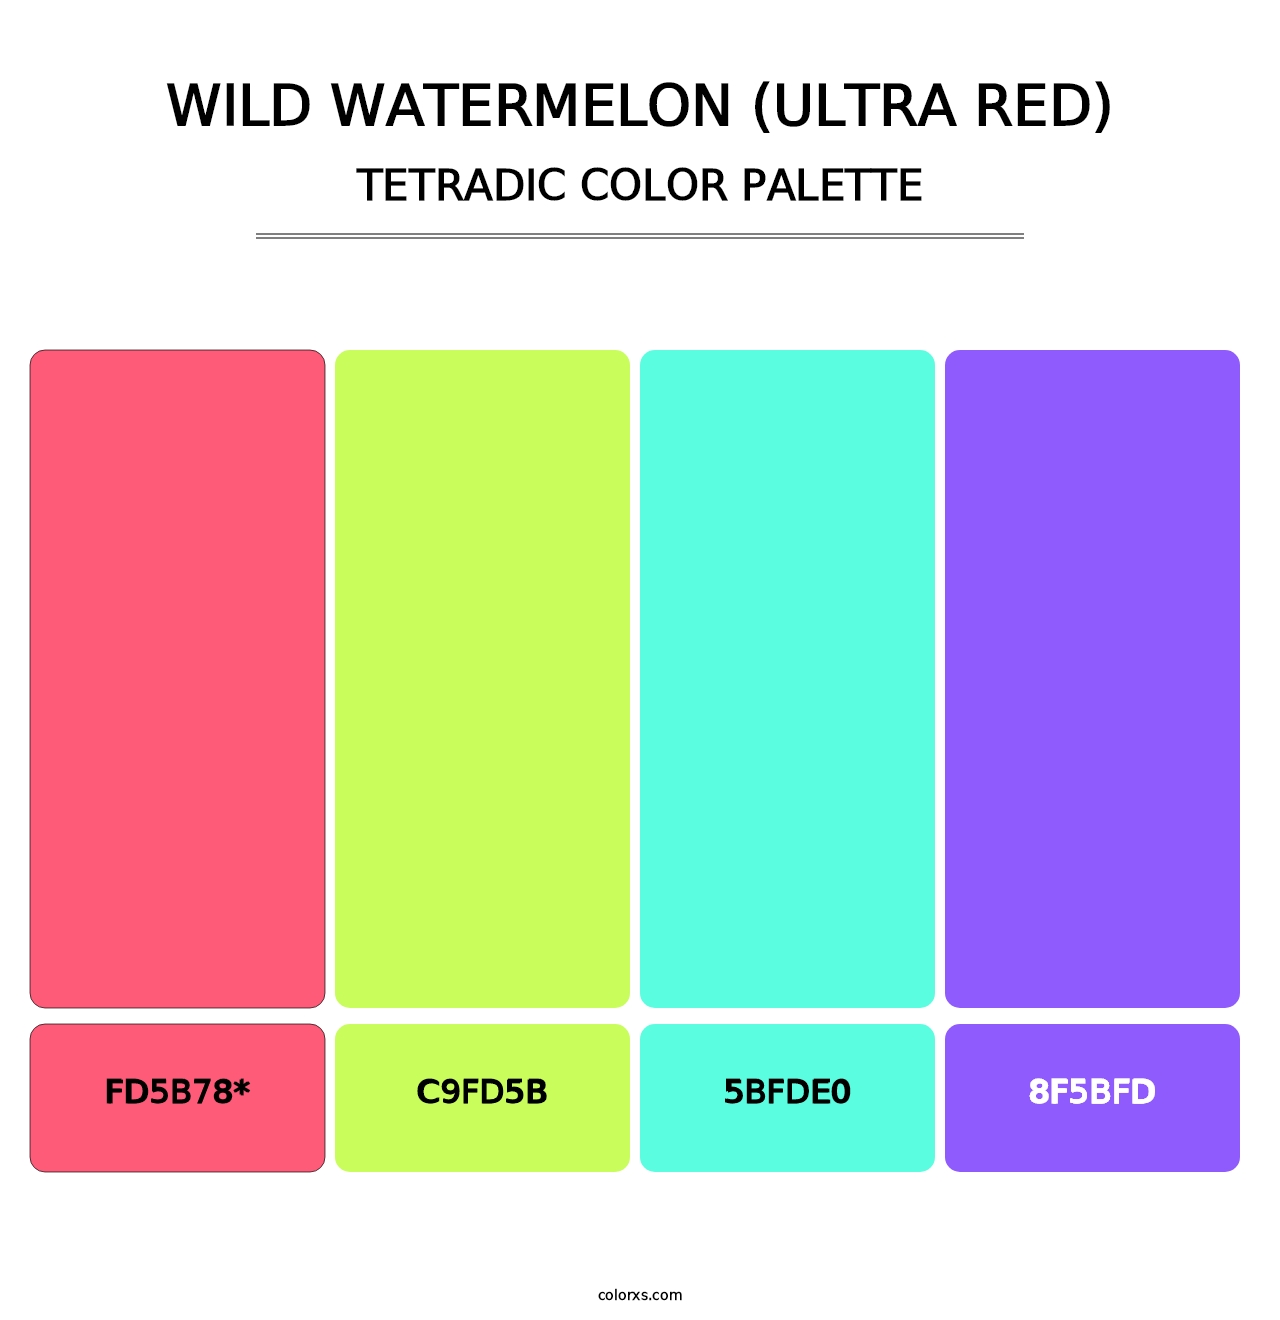 Wild Watermelon (Ultra Red) - Tetradic Color Palette